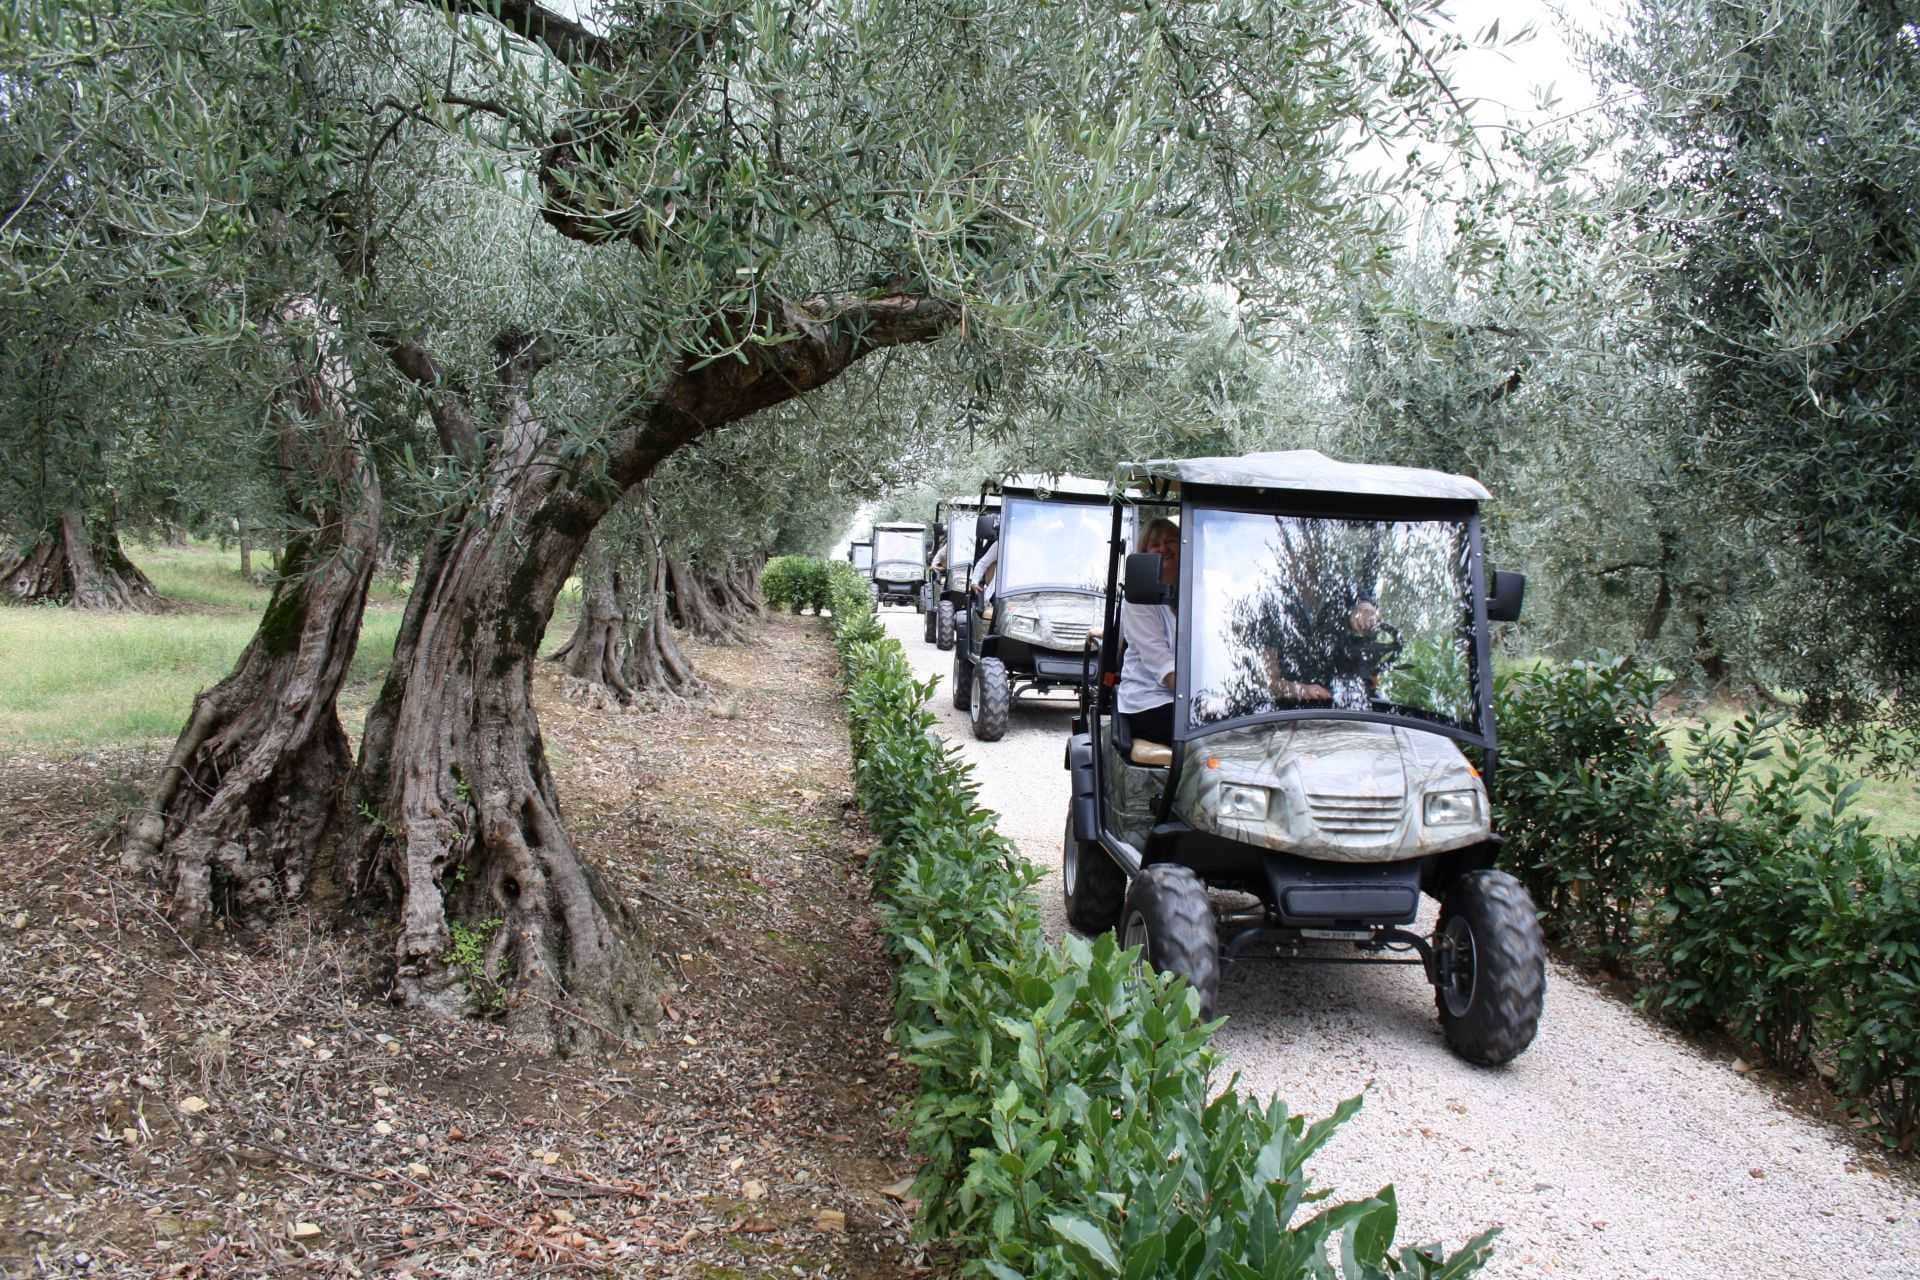 profiles-production-history-and-innovation-guide-an-awardwinning-producer-in-umbria-olive-oil-times